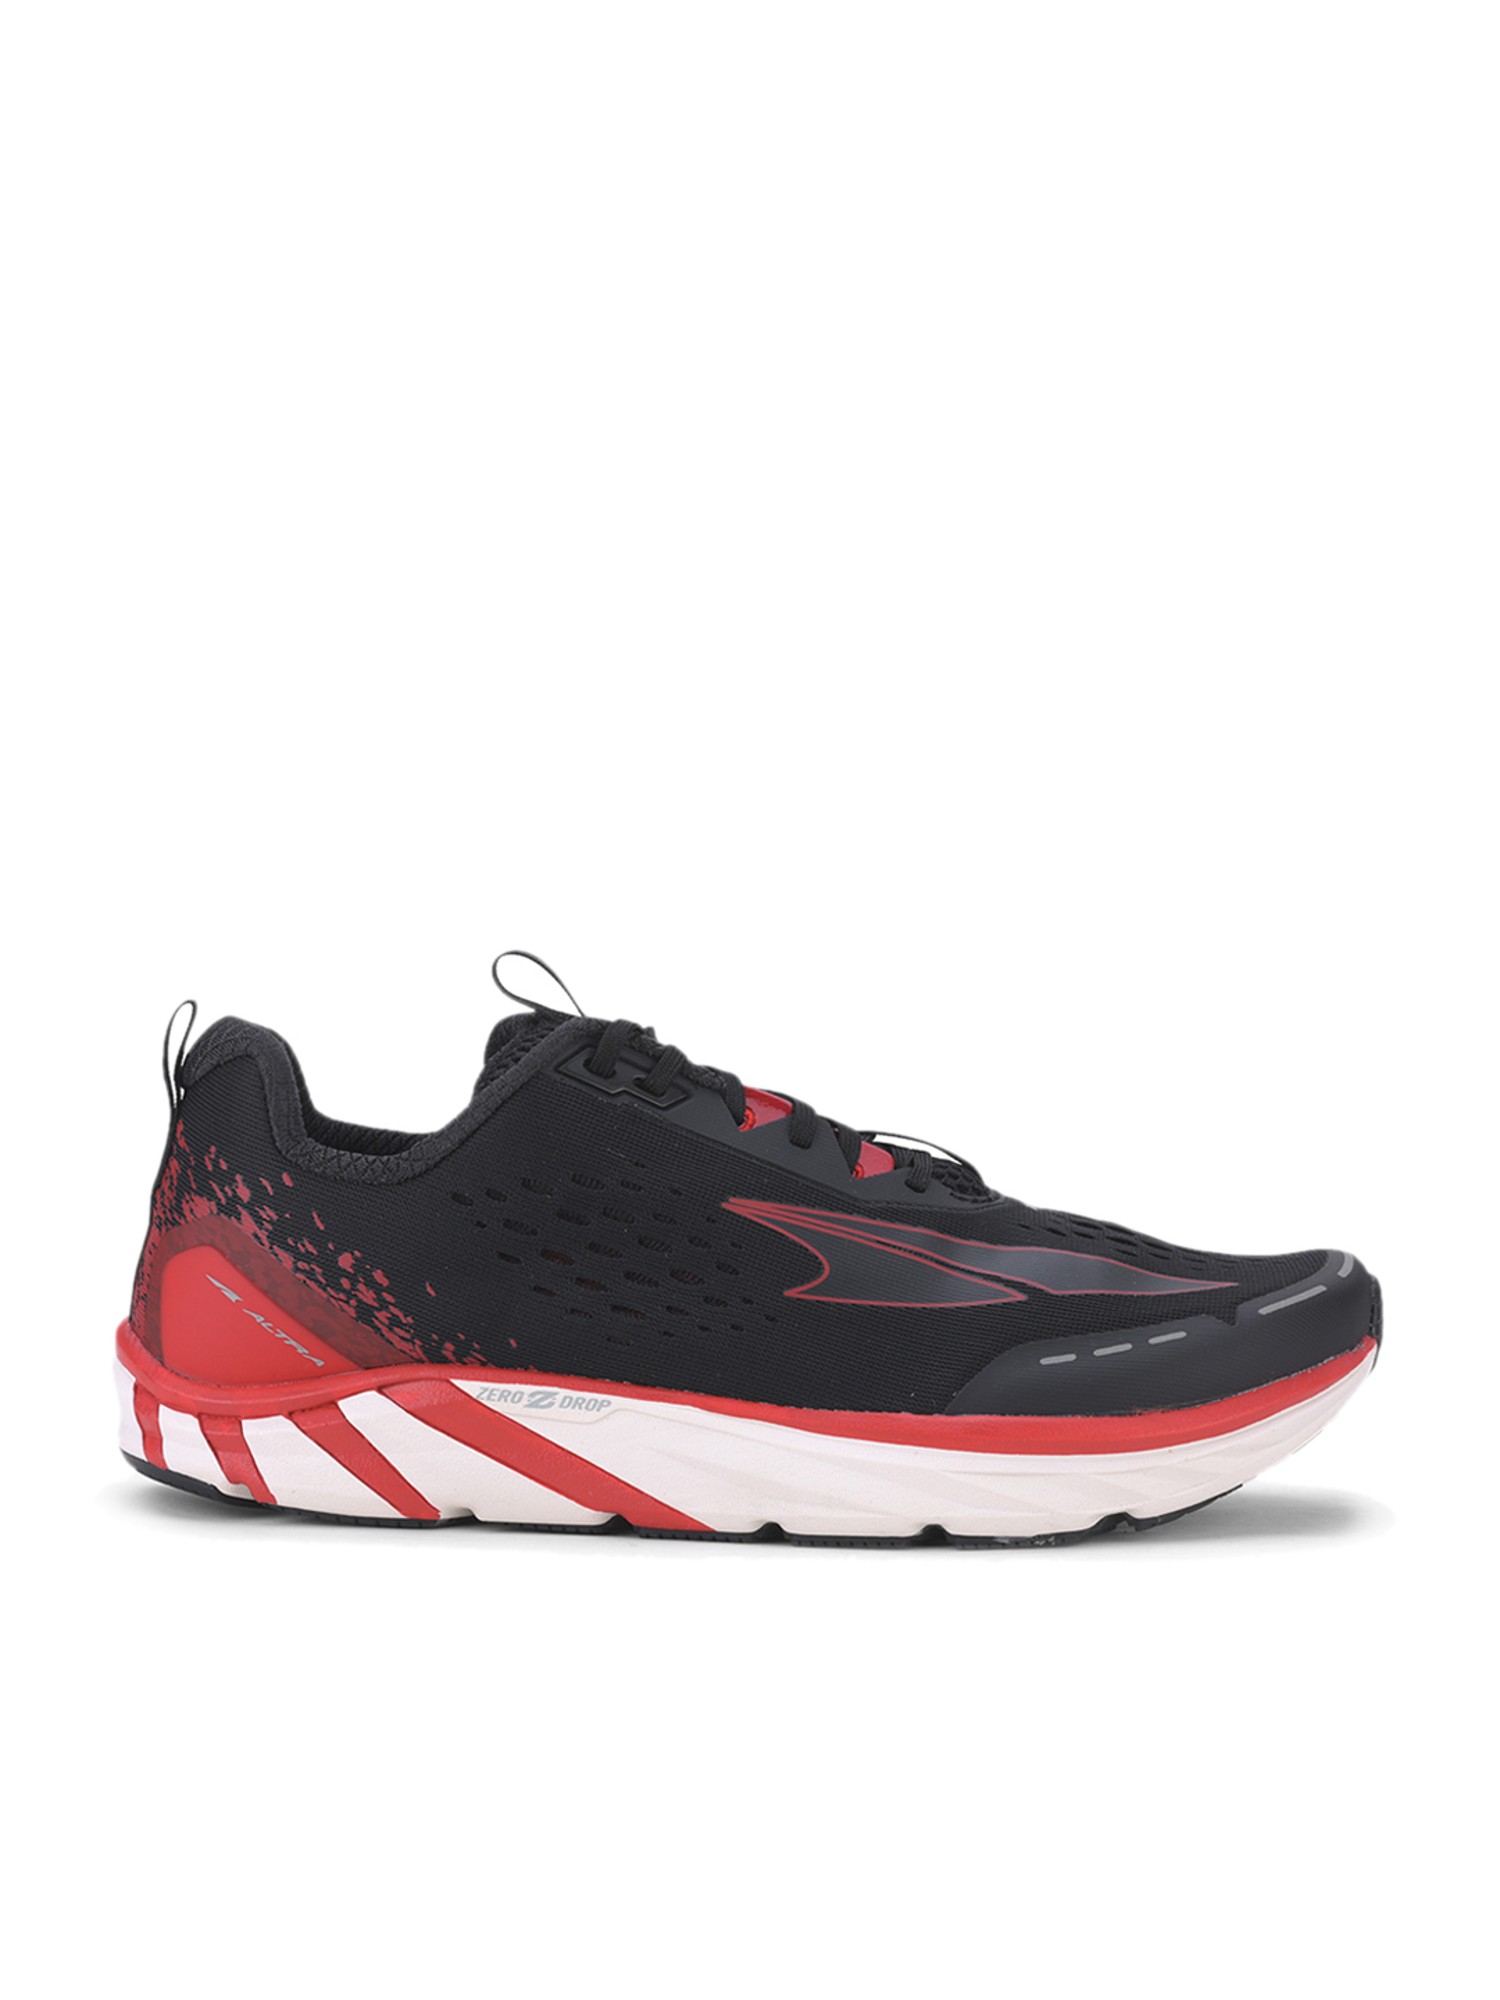 Black / Red Altra Torin 4 Men's Running Shoes Size 9 or 10 ALM1937F061 for sale online 